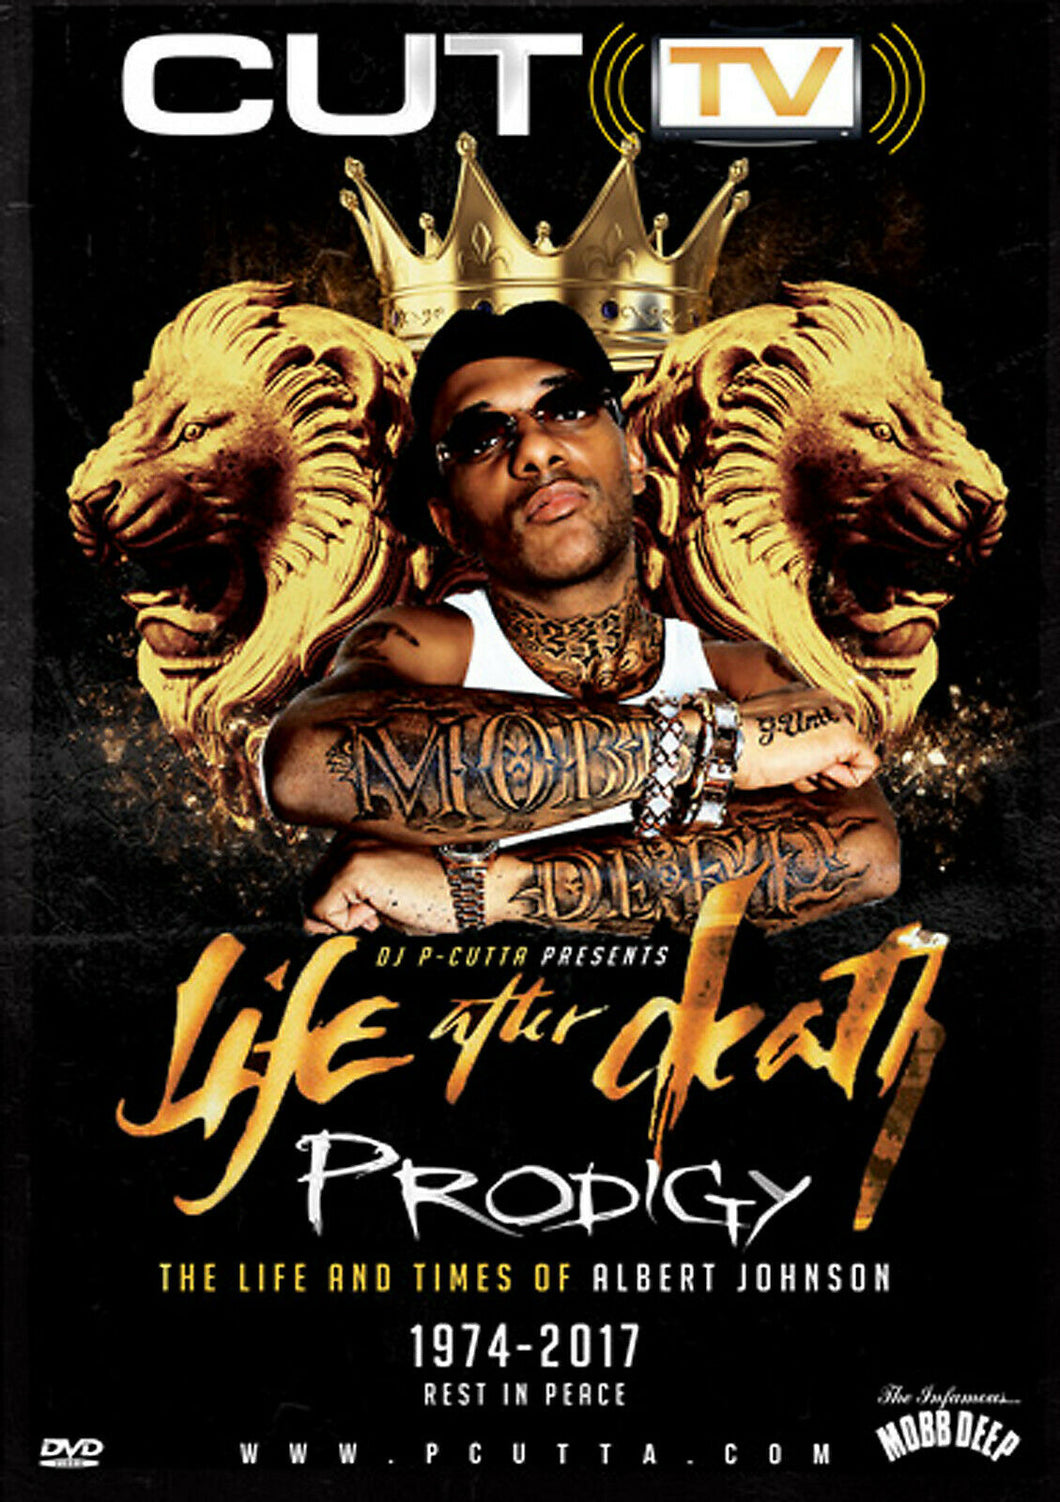 CUT TV PRESENTS: PRODIGY - THE LIFE AND TIMES OF ALBERT JOHNSON [DVD]